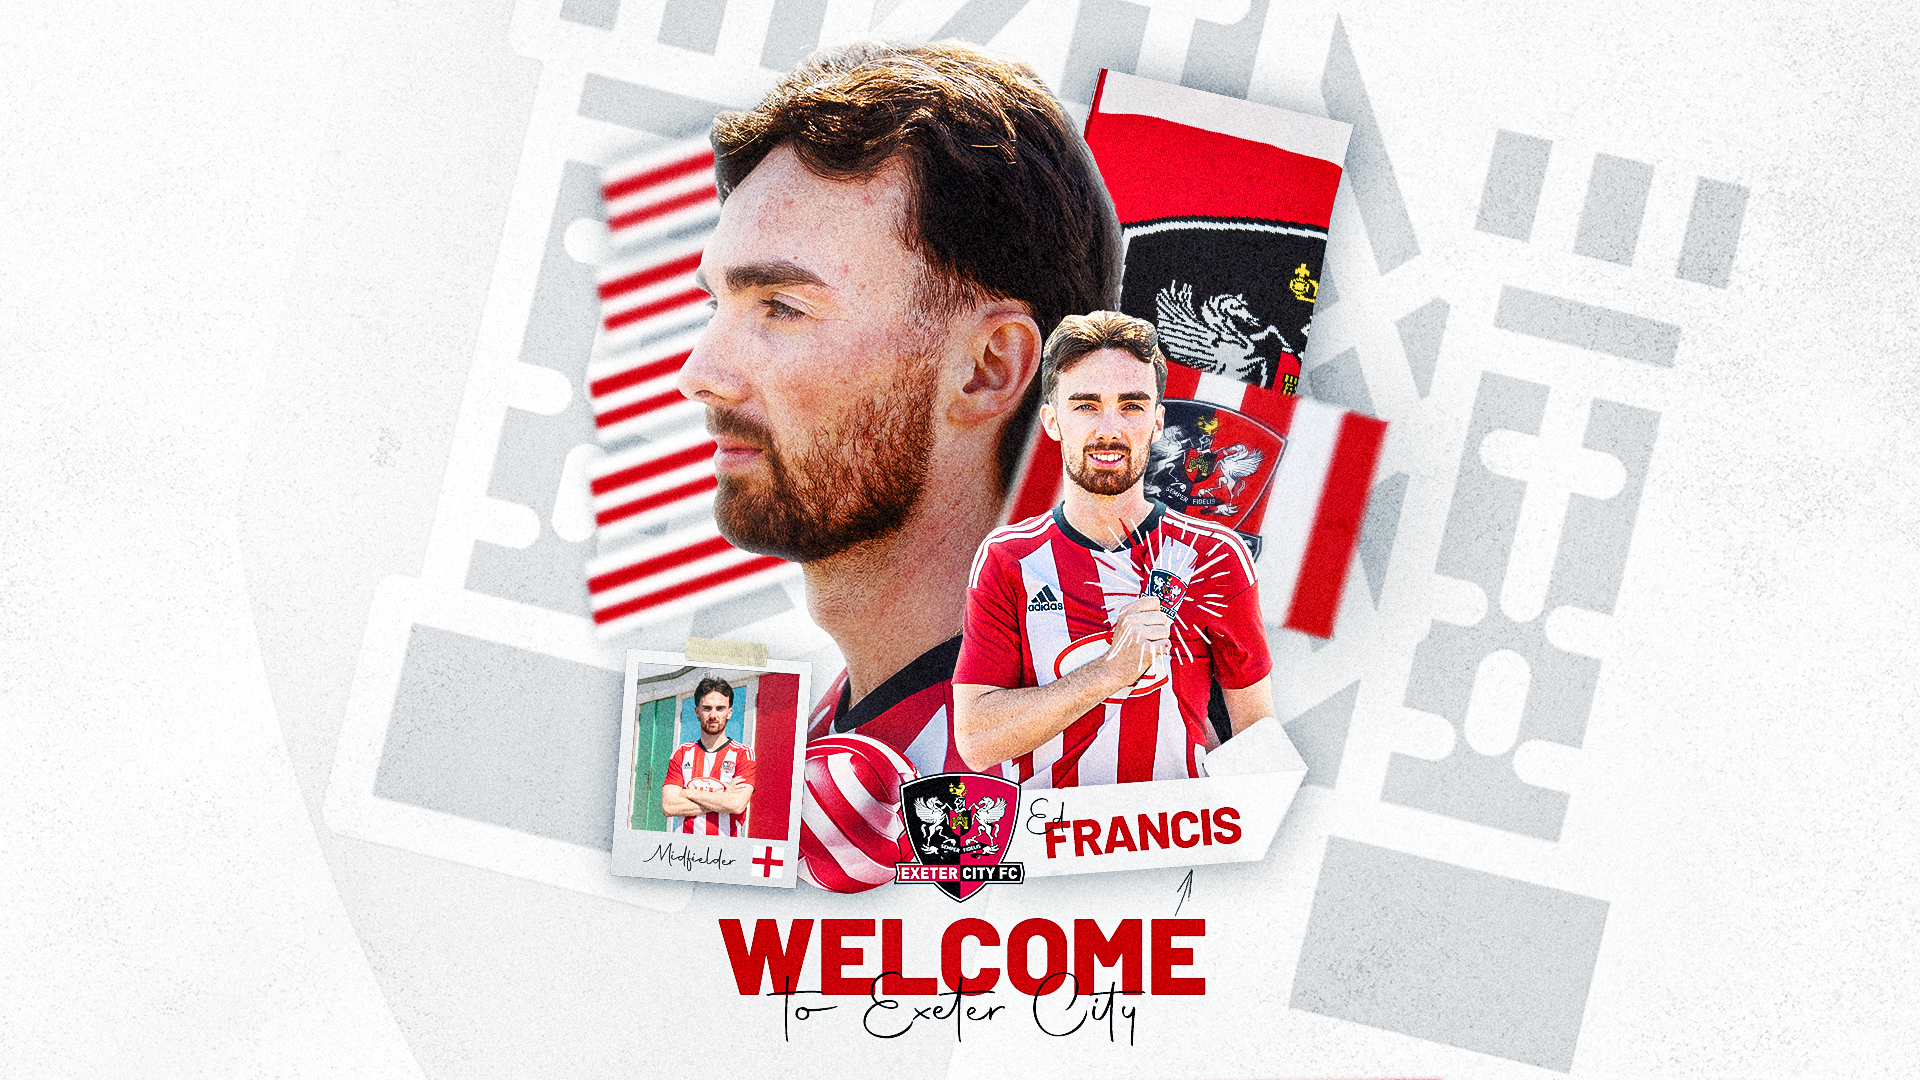 Image welcoming Ed Francis to the club, with three images and the text 'welcome Ed Francis'